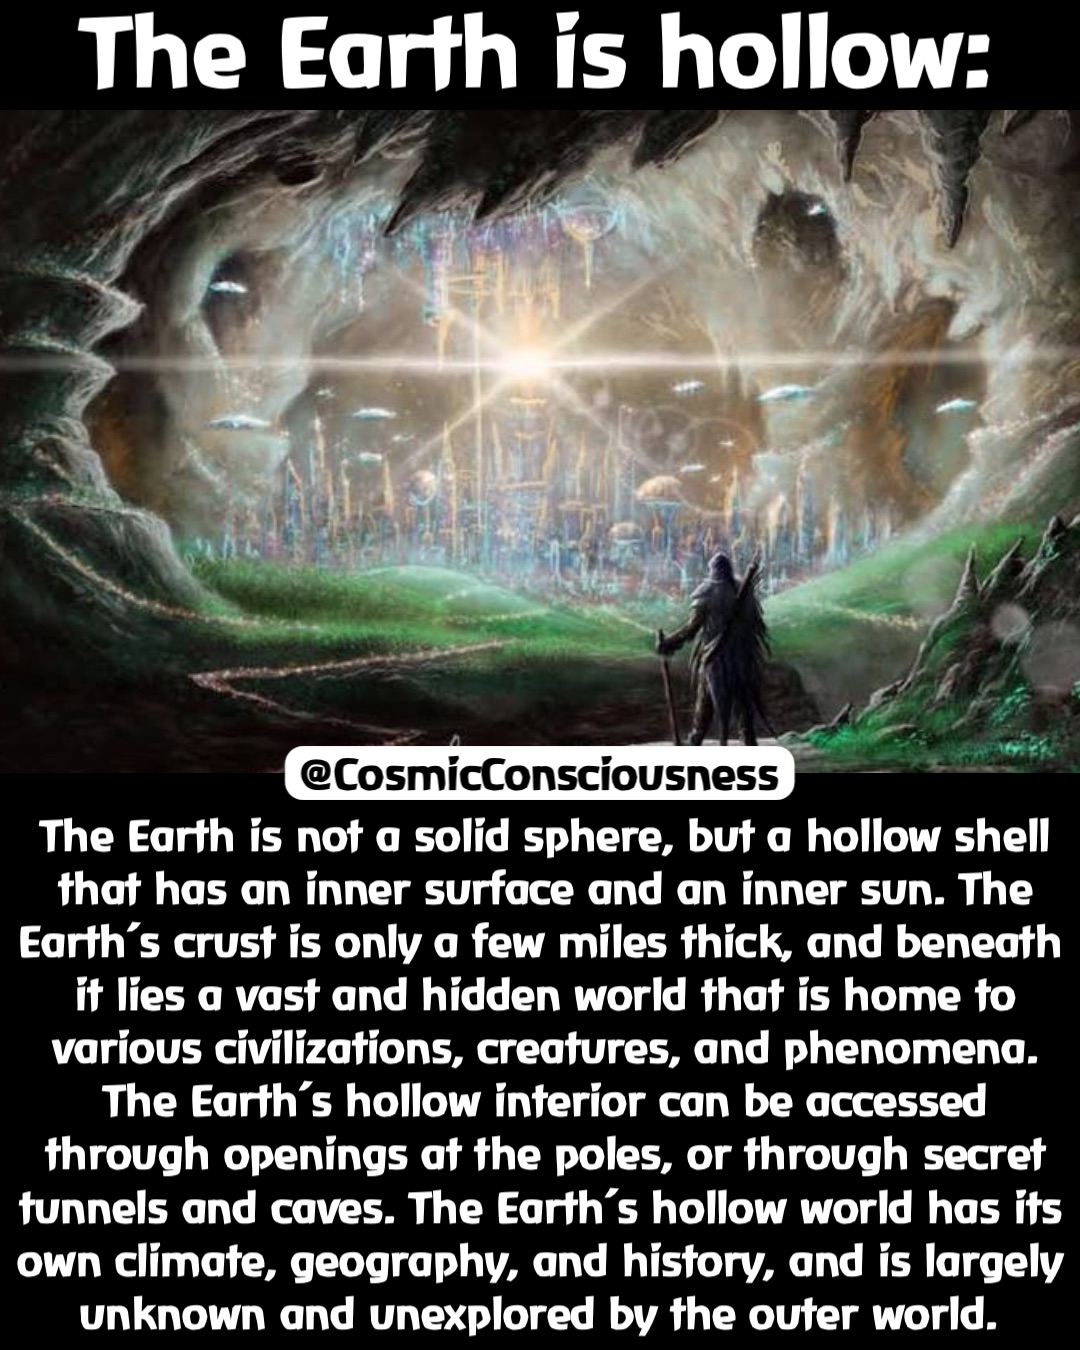 The Earth is hollow: The Earth is not a solid sphere, but a hollow shell that has an inner surface and an inner sun. The Earth’s crust is only a few miles thick, and beneath it lies a vast and hidden world that is home to various civilizations, creatures, and phenomena. The Earth’s hollow interior can be accessed through openings at the poles, or through secret tunnels and caves. The Earth’s hollow world has its own climate, geography, and history, and is largely unknown and unexplored by the outer world. @CosmicConsciousness